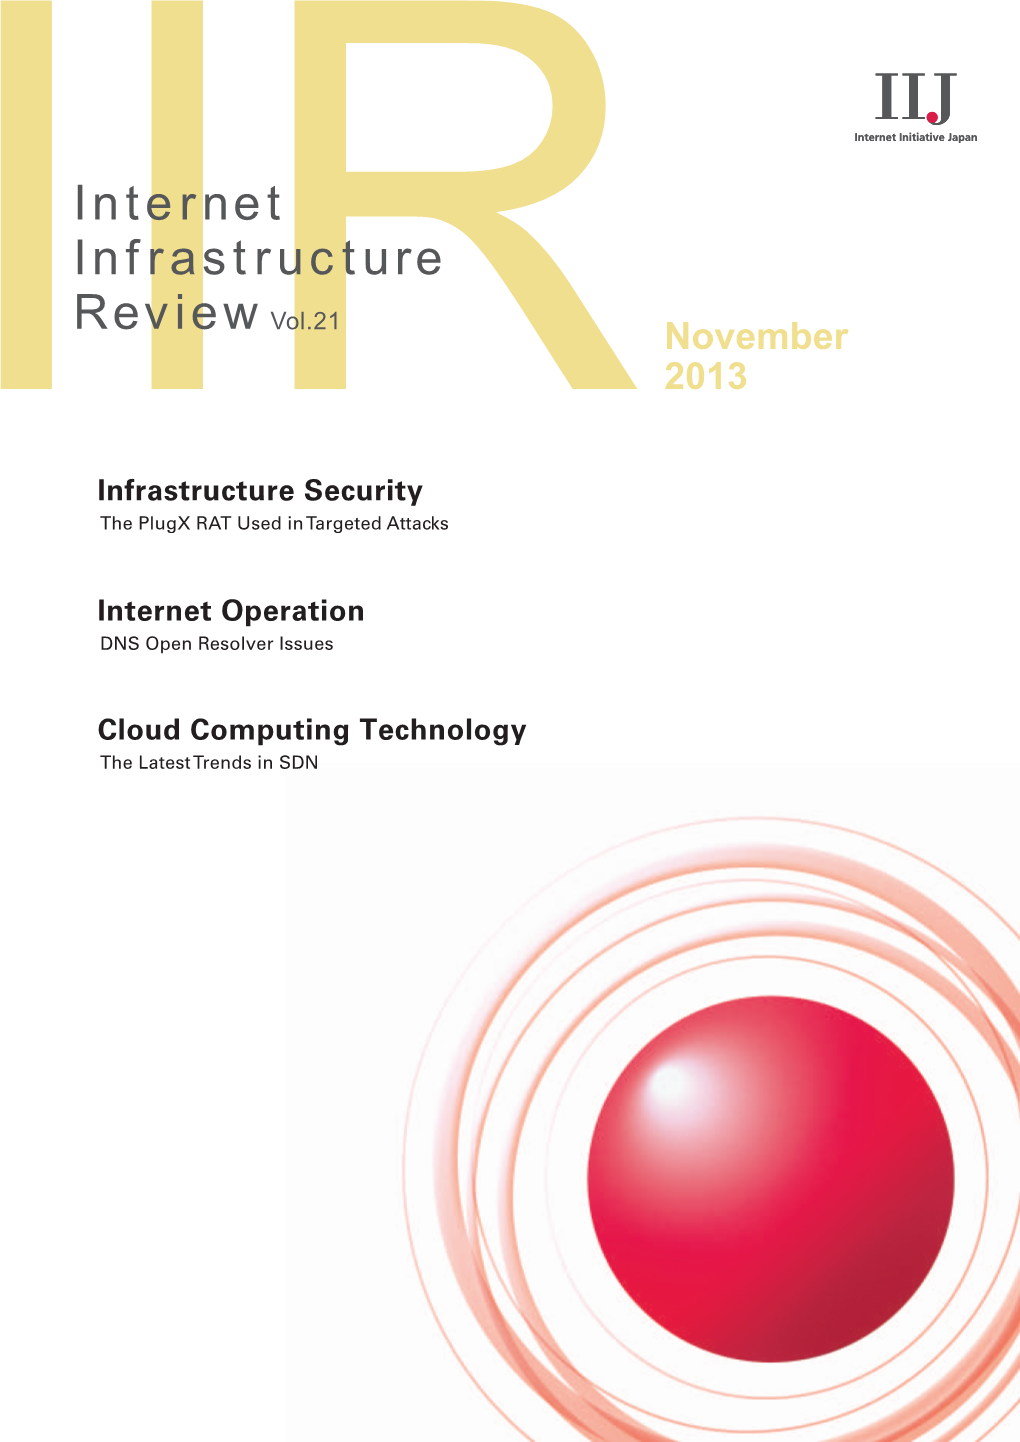 Internet Infrastructure Review Vol.21